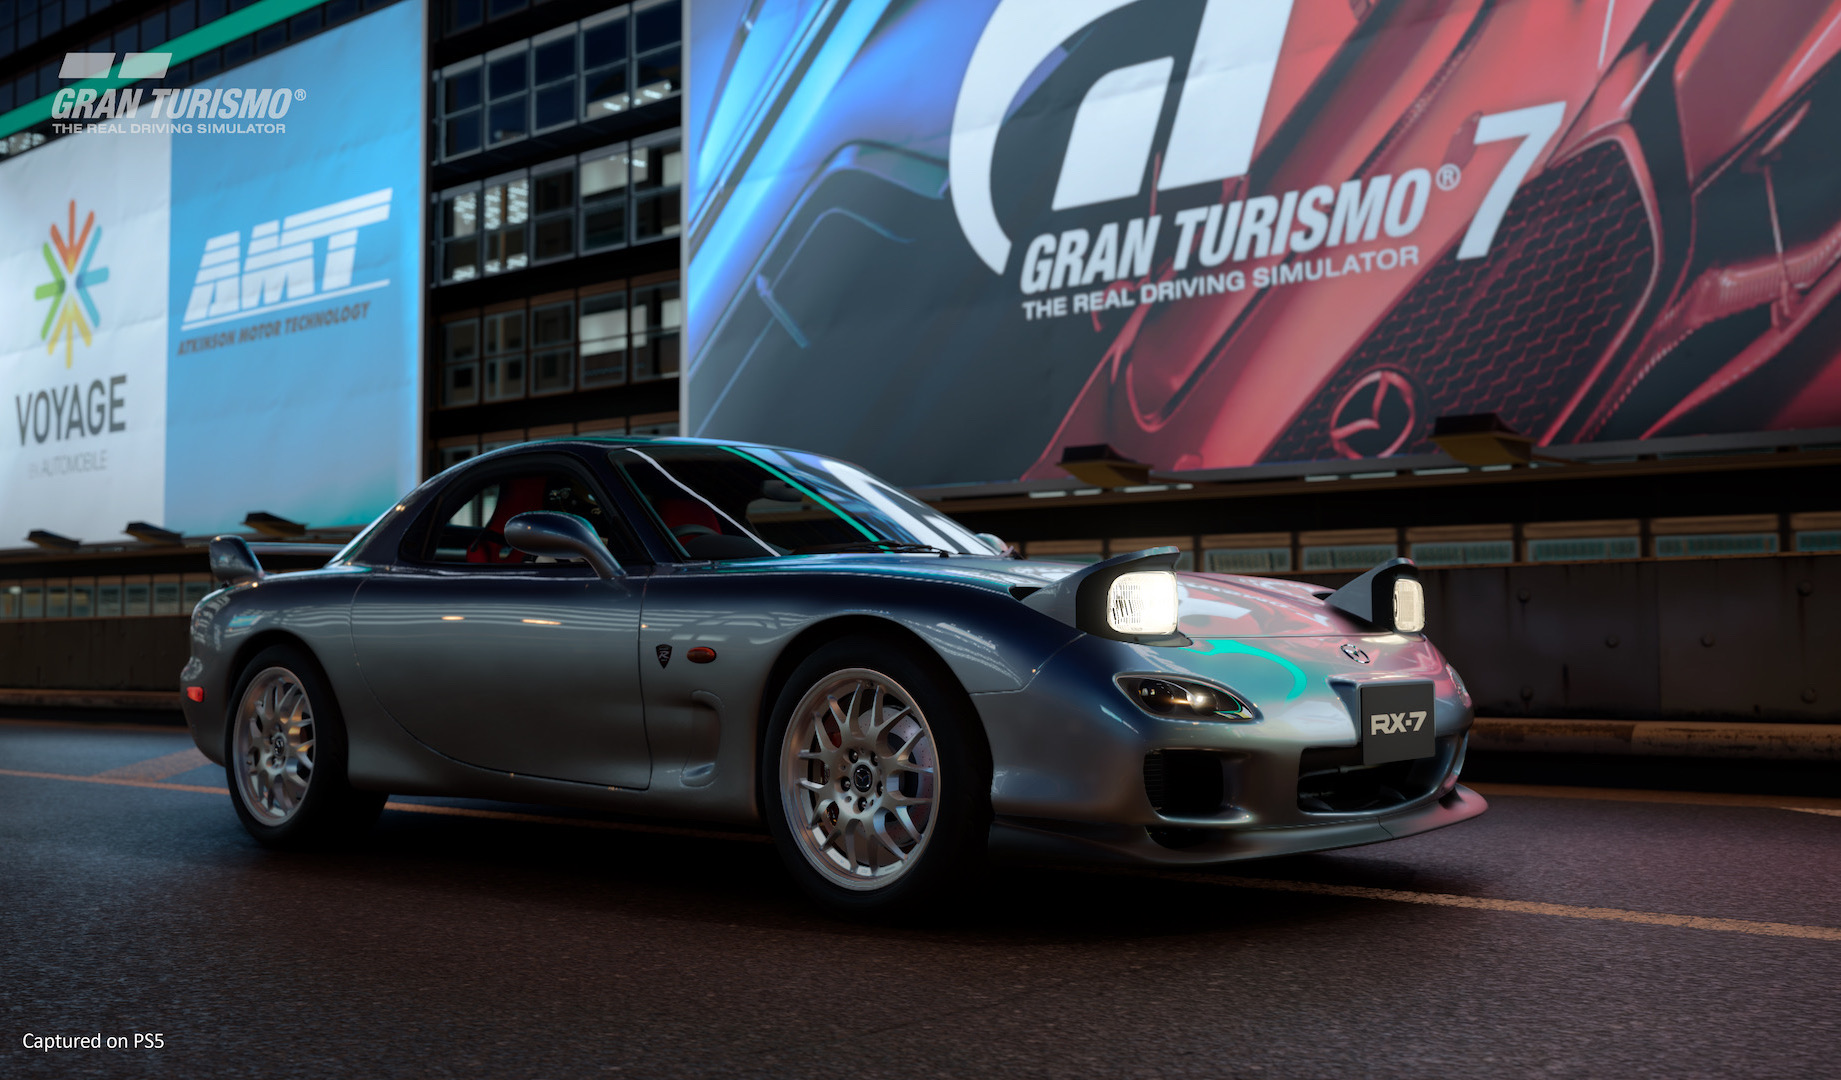 Gran Turismo 7 officially launches, for PS4 and PS5